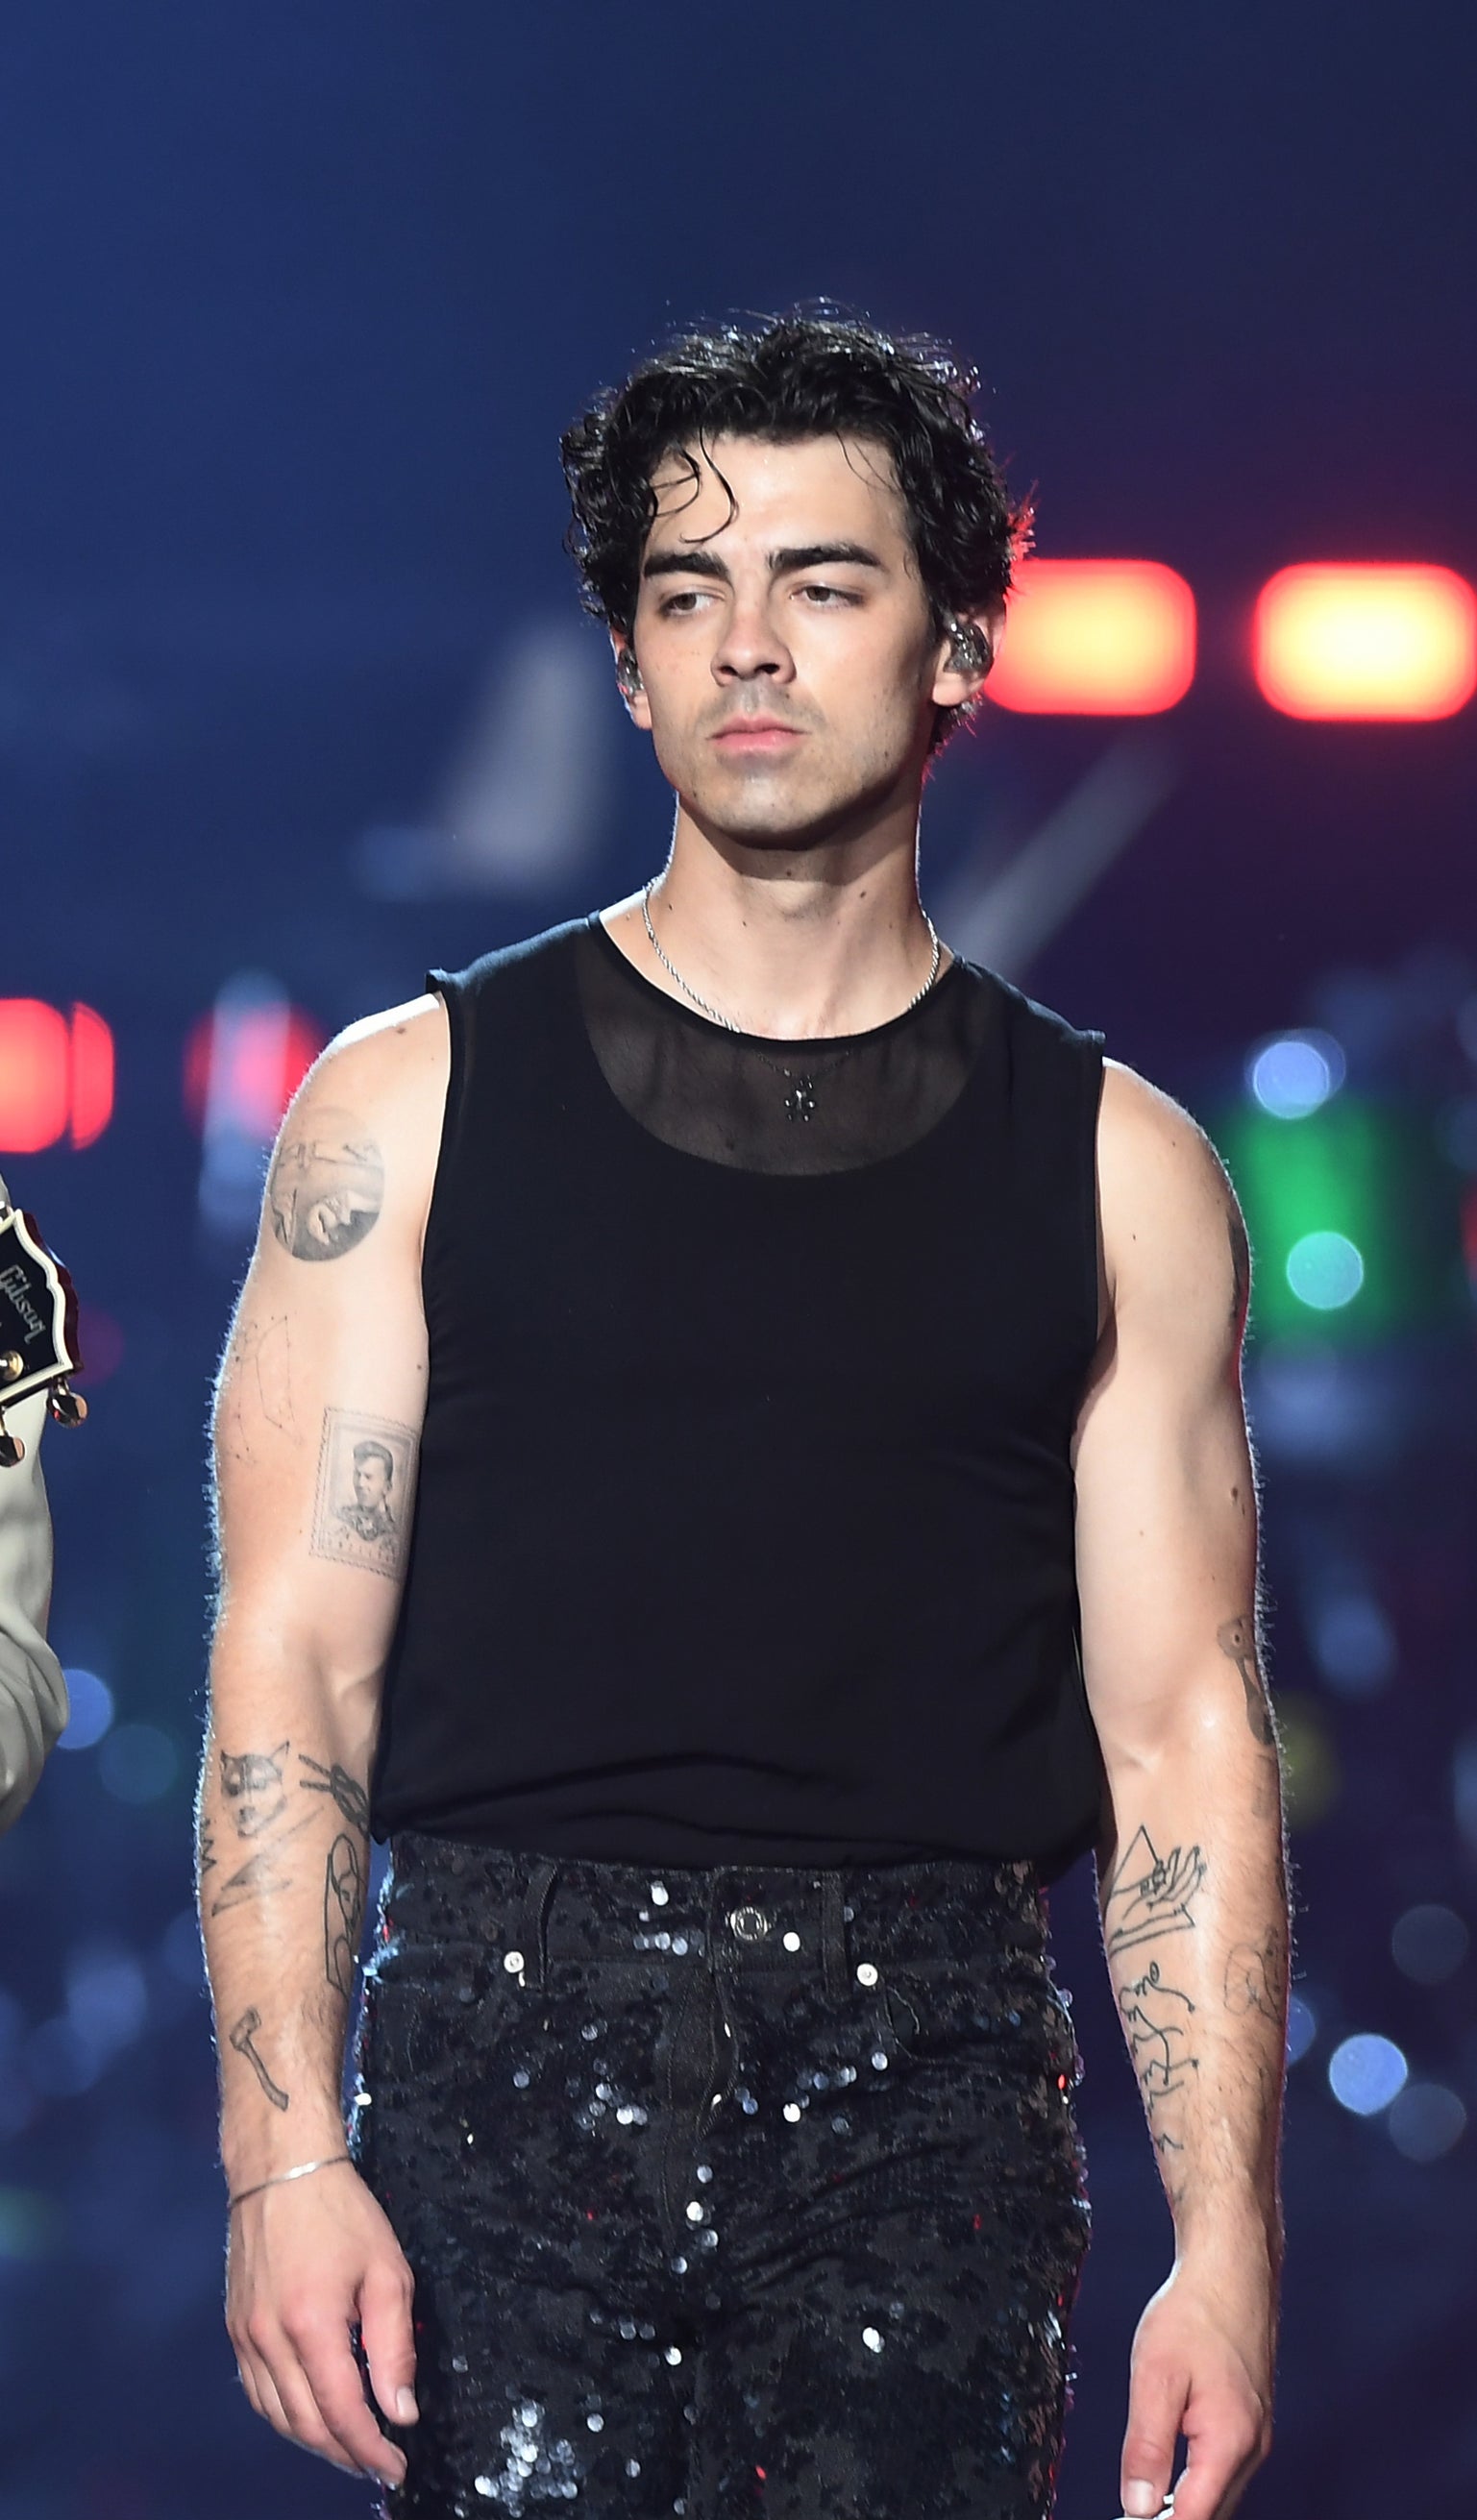 Close-up of Joe in a sleeveless tee and sparkly pants